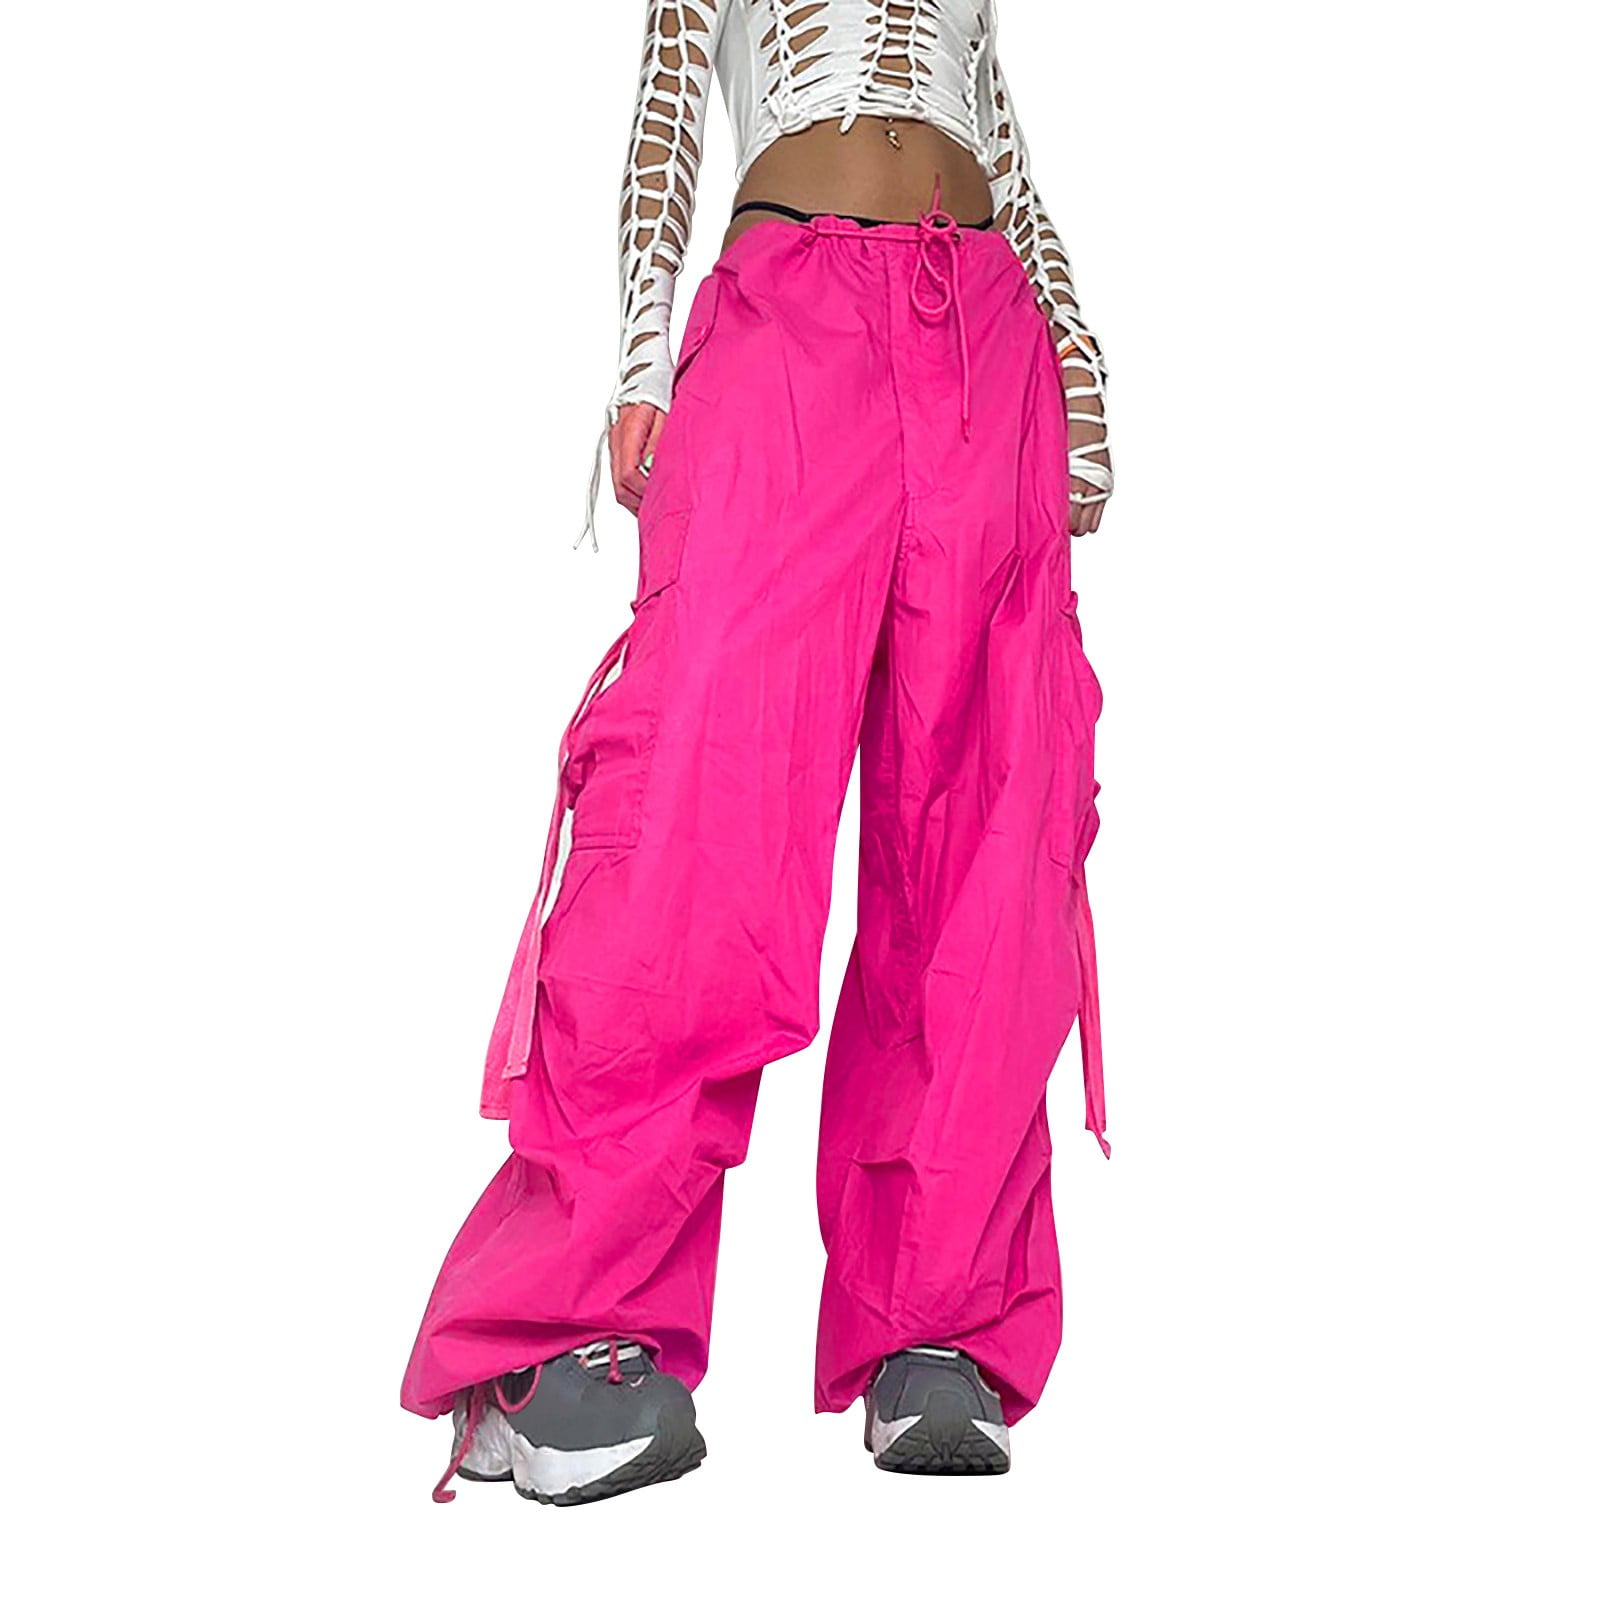 CaComMARK PI Capris/Cargo Pants for Women Plus Size Ladies Solid Hippie  Punk Trousers Streetwear Jogger Pocket Loose Overalls Long Trousers Pink